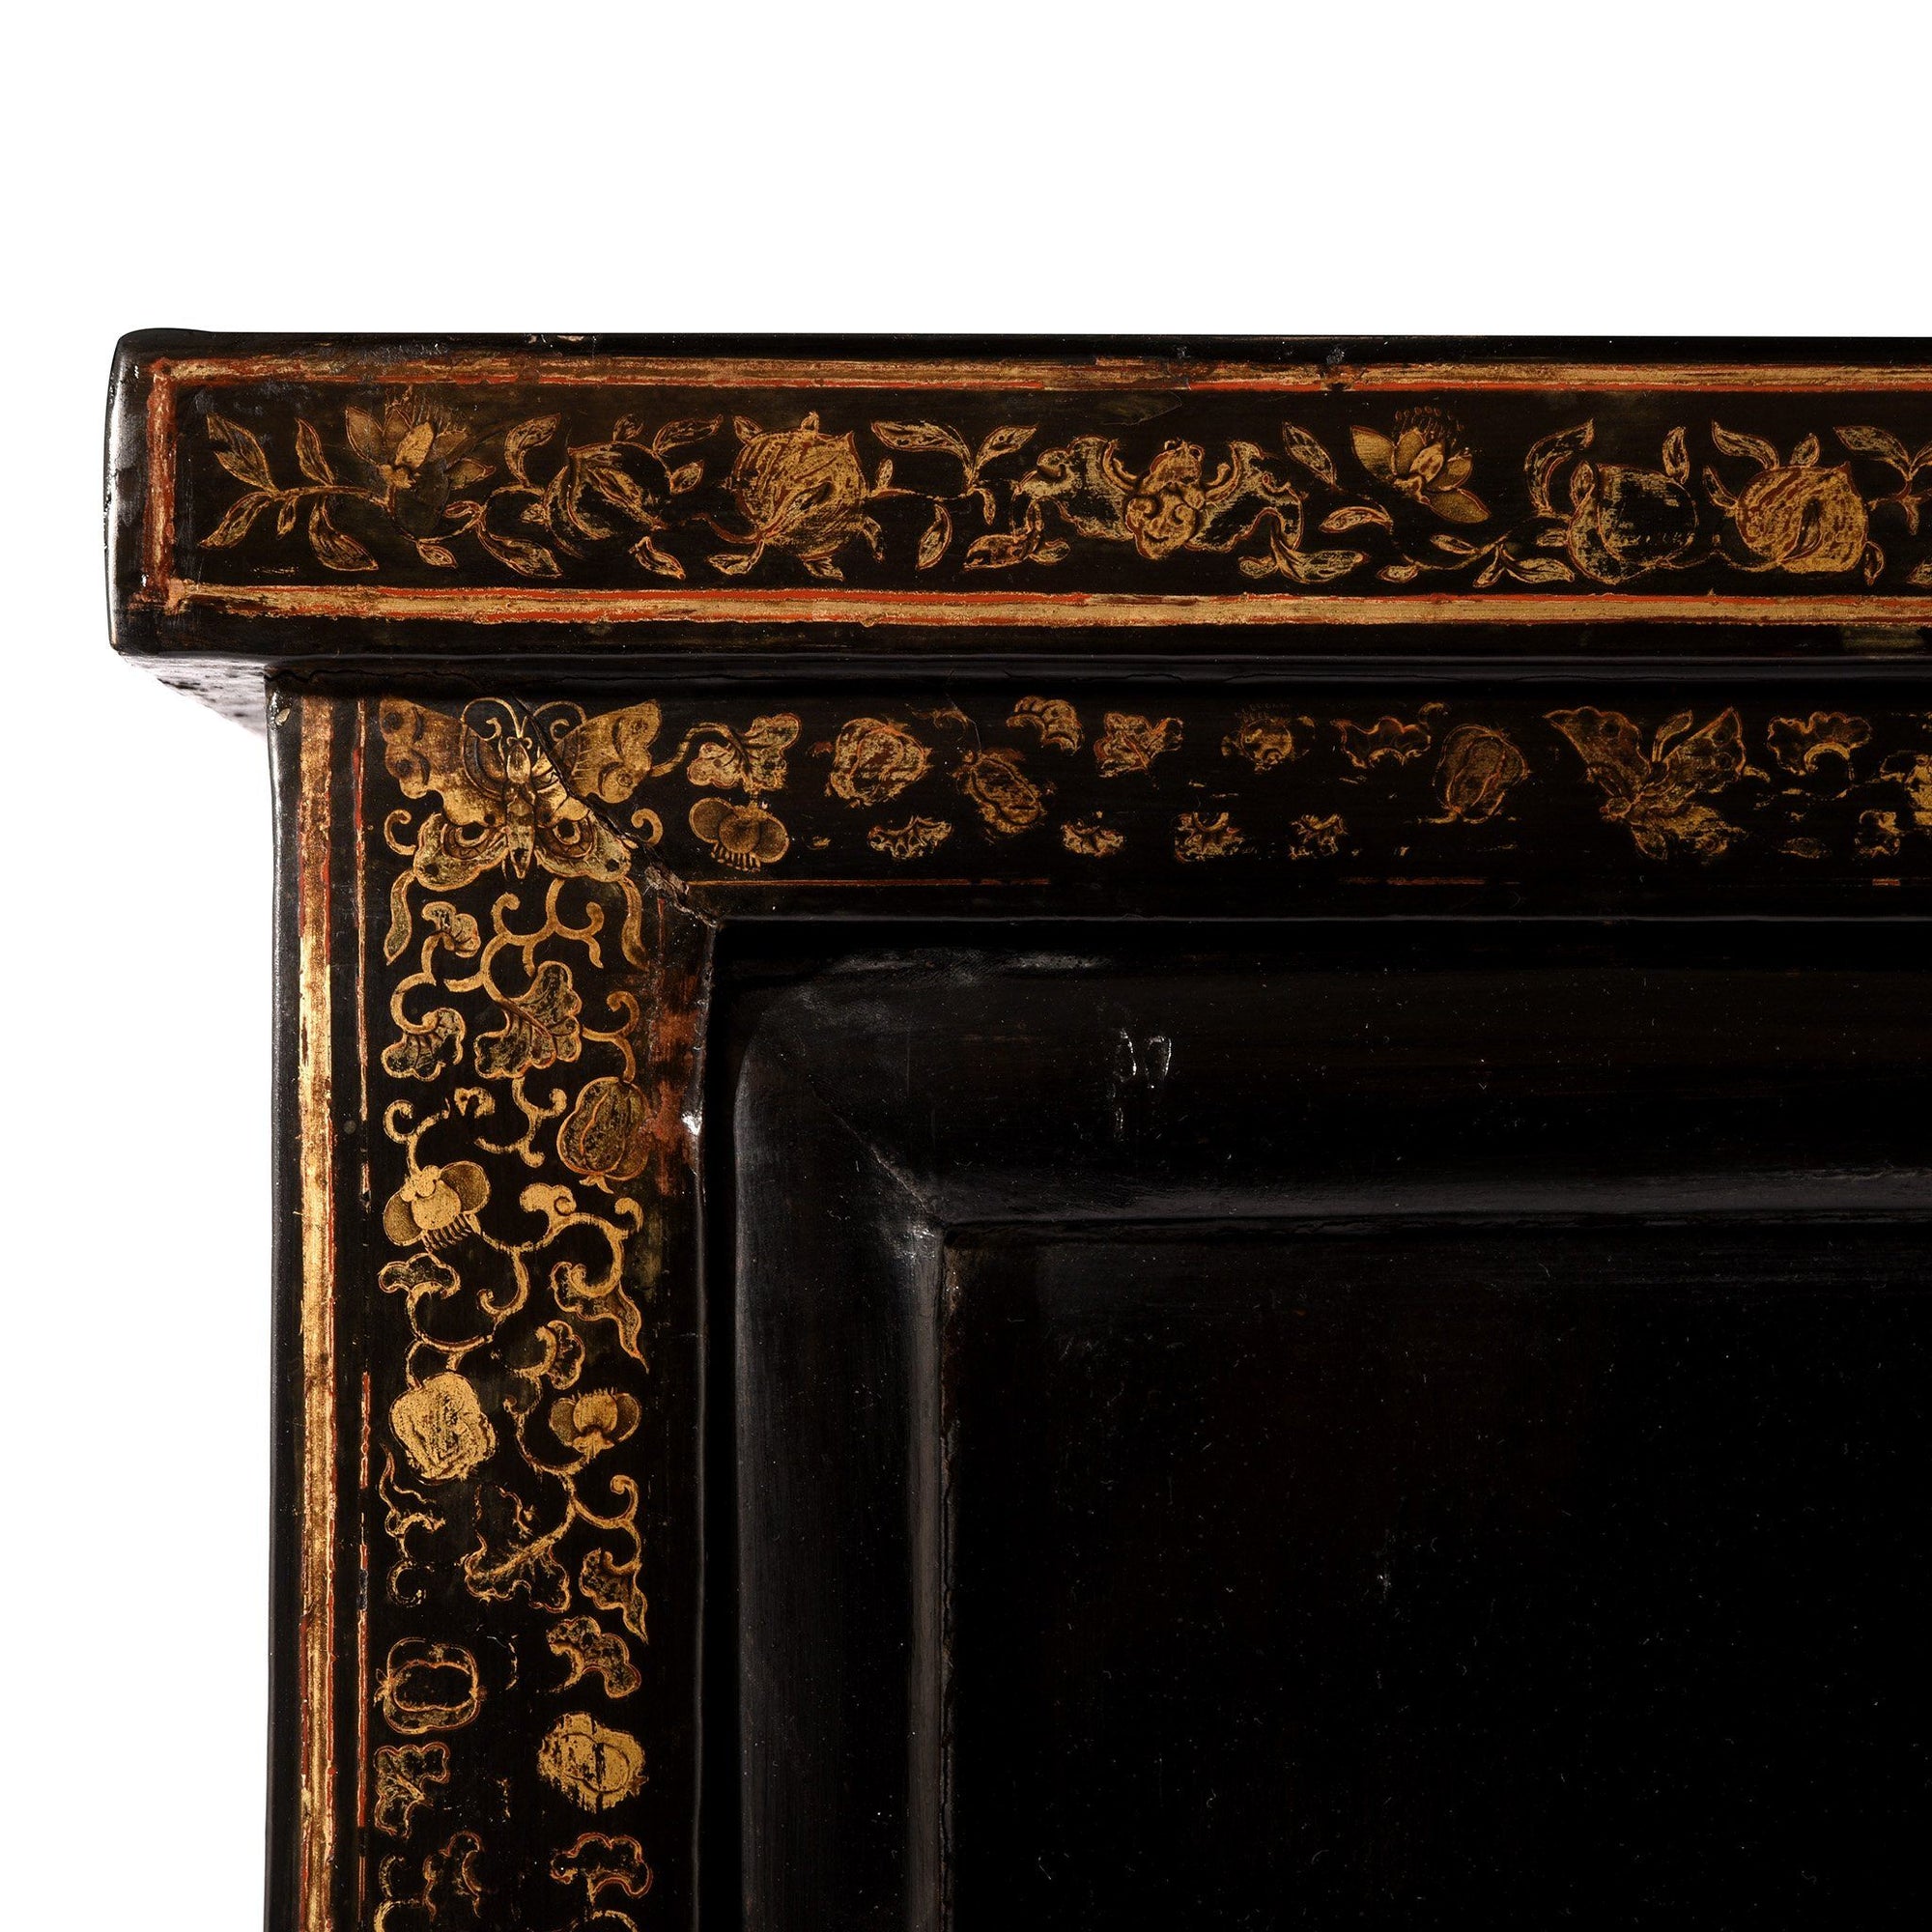 Chinese Export Gilt Black Lacquer Cabinet - Early 19thC | Indigo Antiques